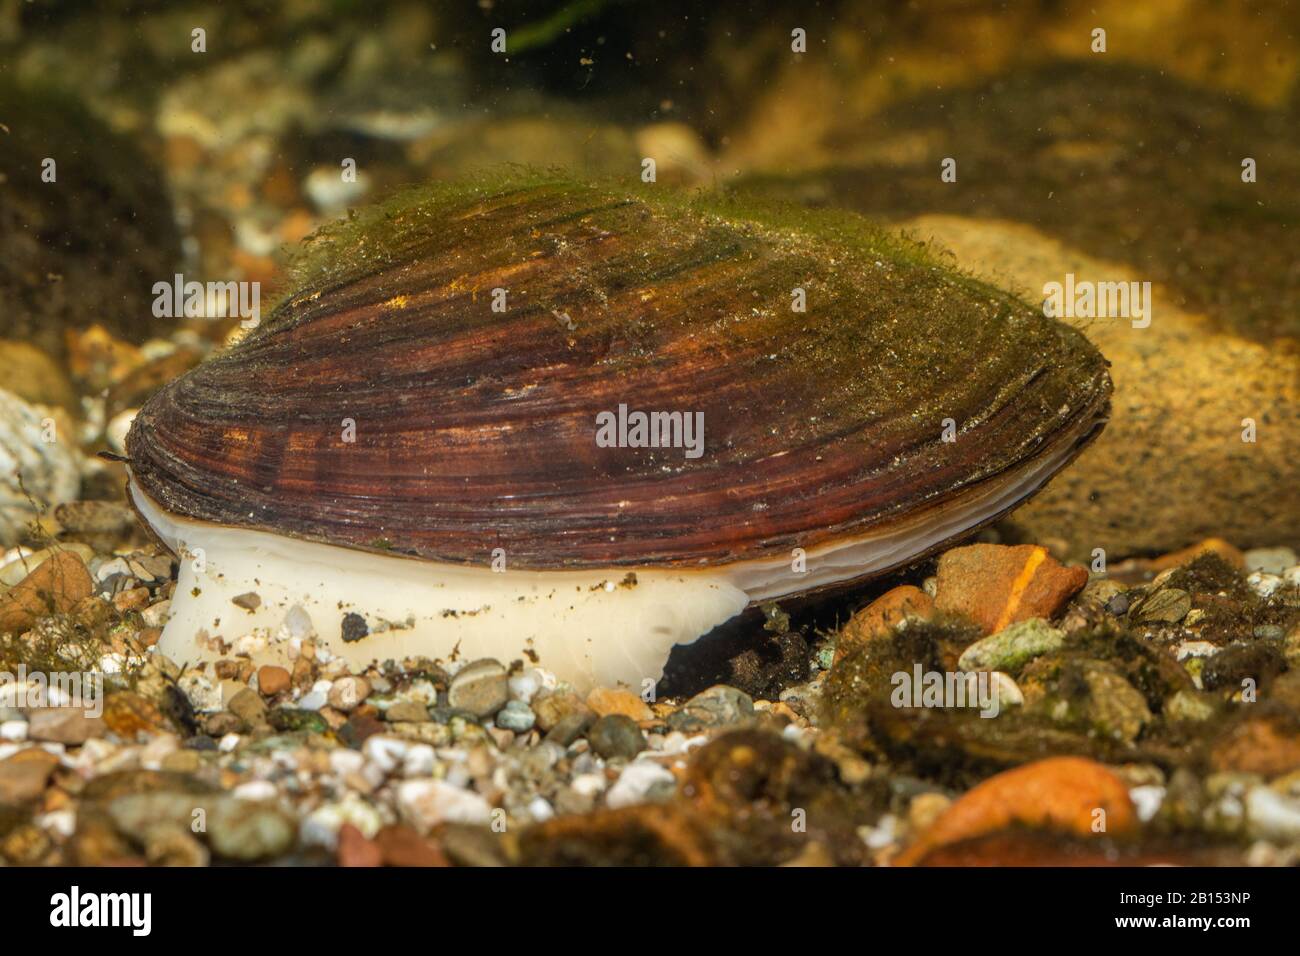 Common pond mussel, duck mussel (Anodonta anatina), digs in the ground with its foot, Germany Stock Photo